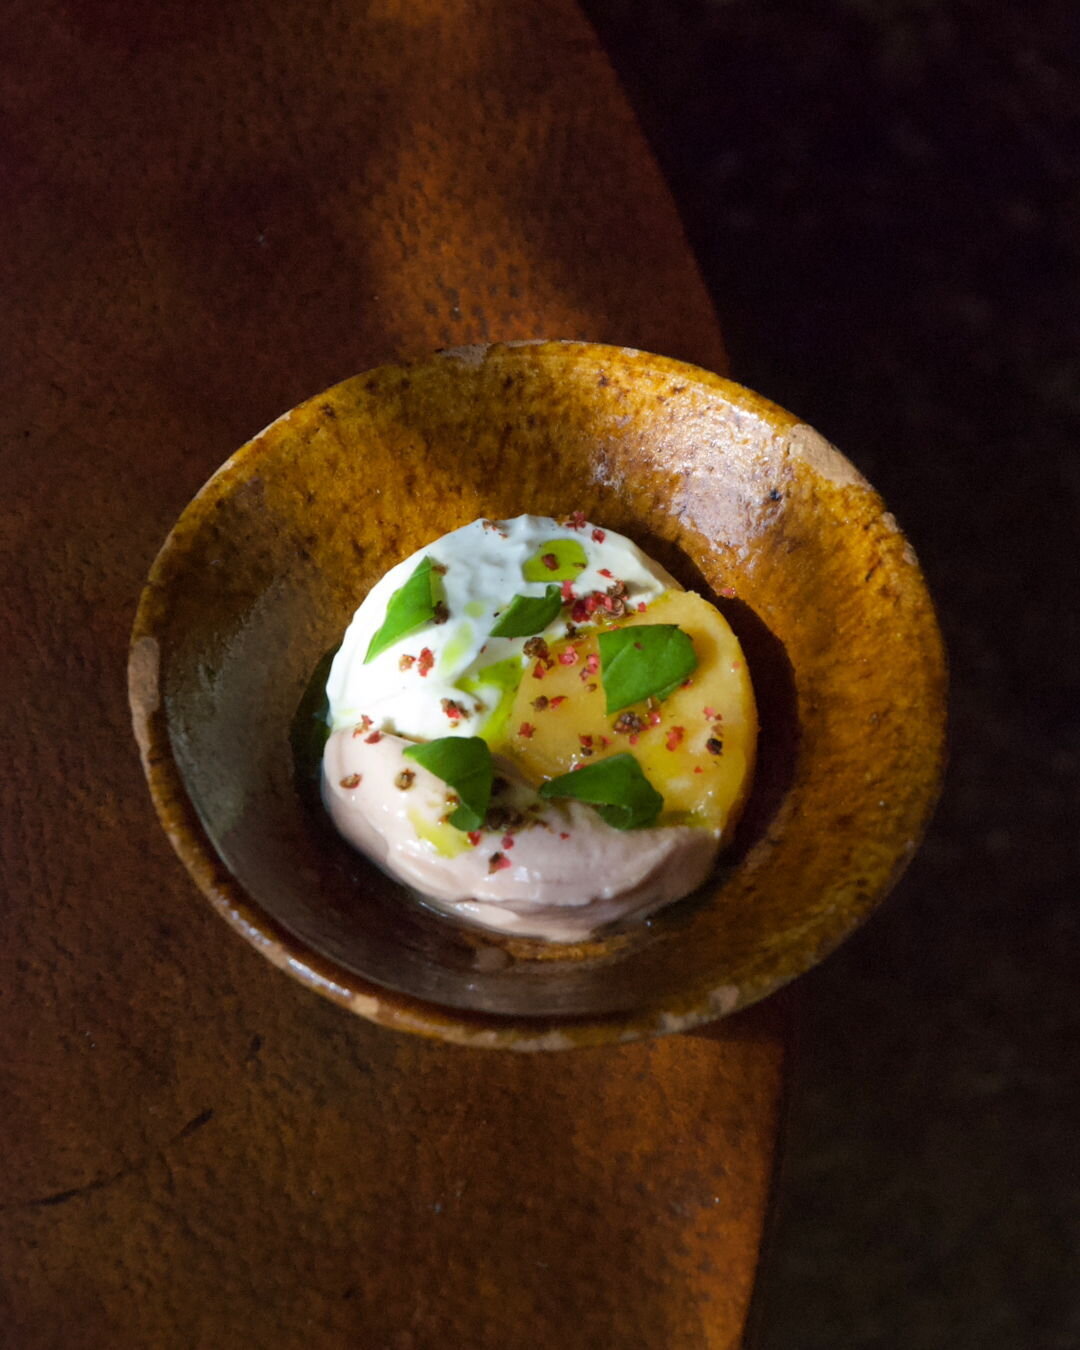 N A R A N J A  C O C O  Y  G U A Y A B A

&mdash;orange, guava, coconut, vanilla cream, and Mexican rum sorbet. Topped with fresh basil, basil oil, coriander seeds, and cracked pink peppercorn&mdash;